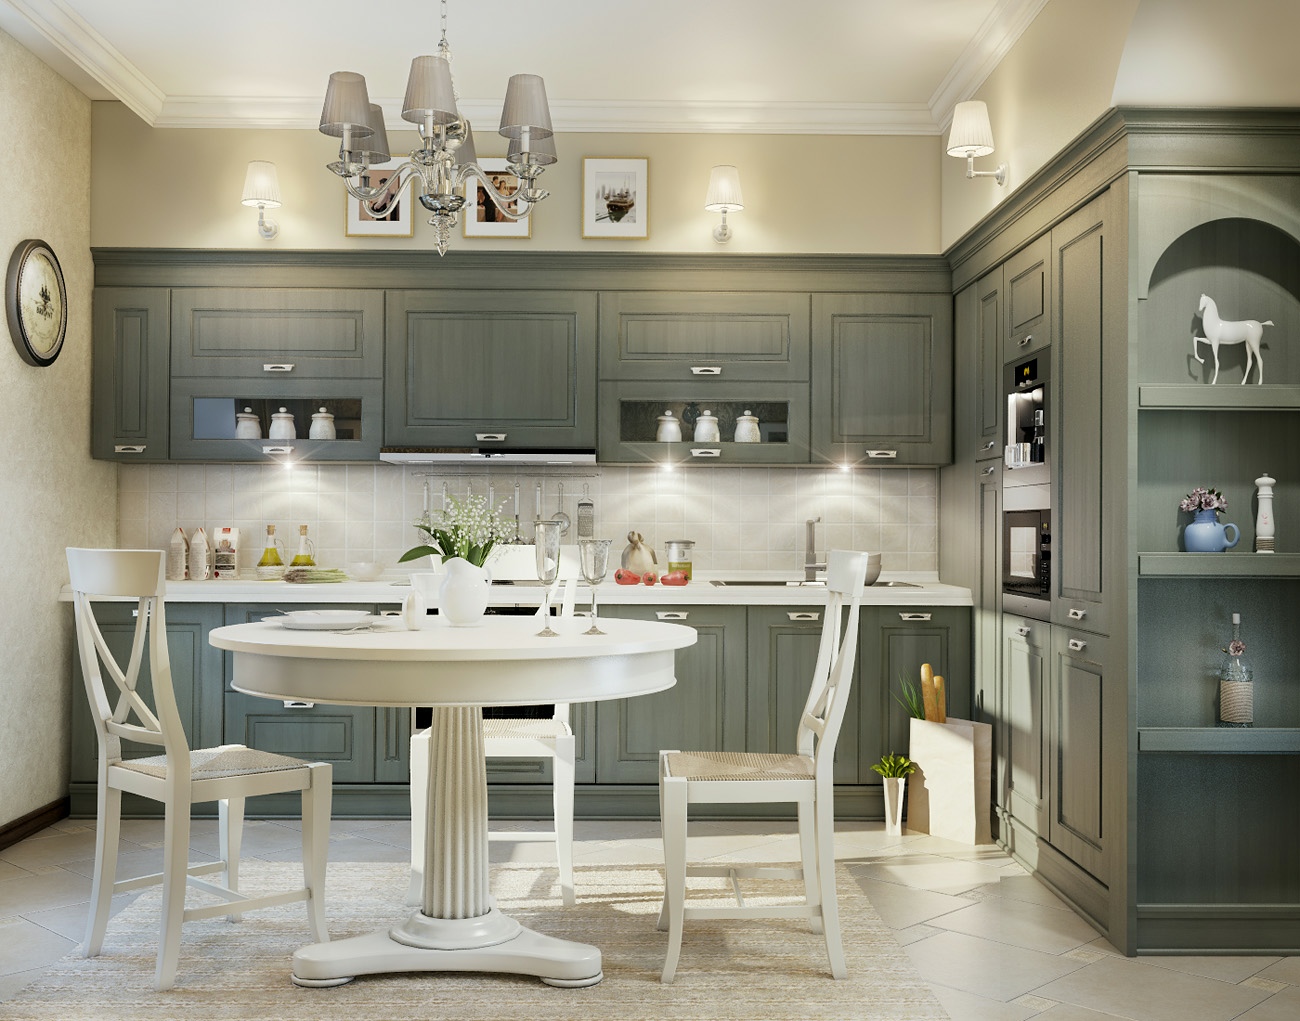 11 luxurious traditional kitchens